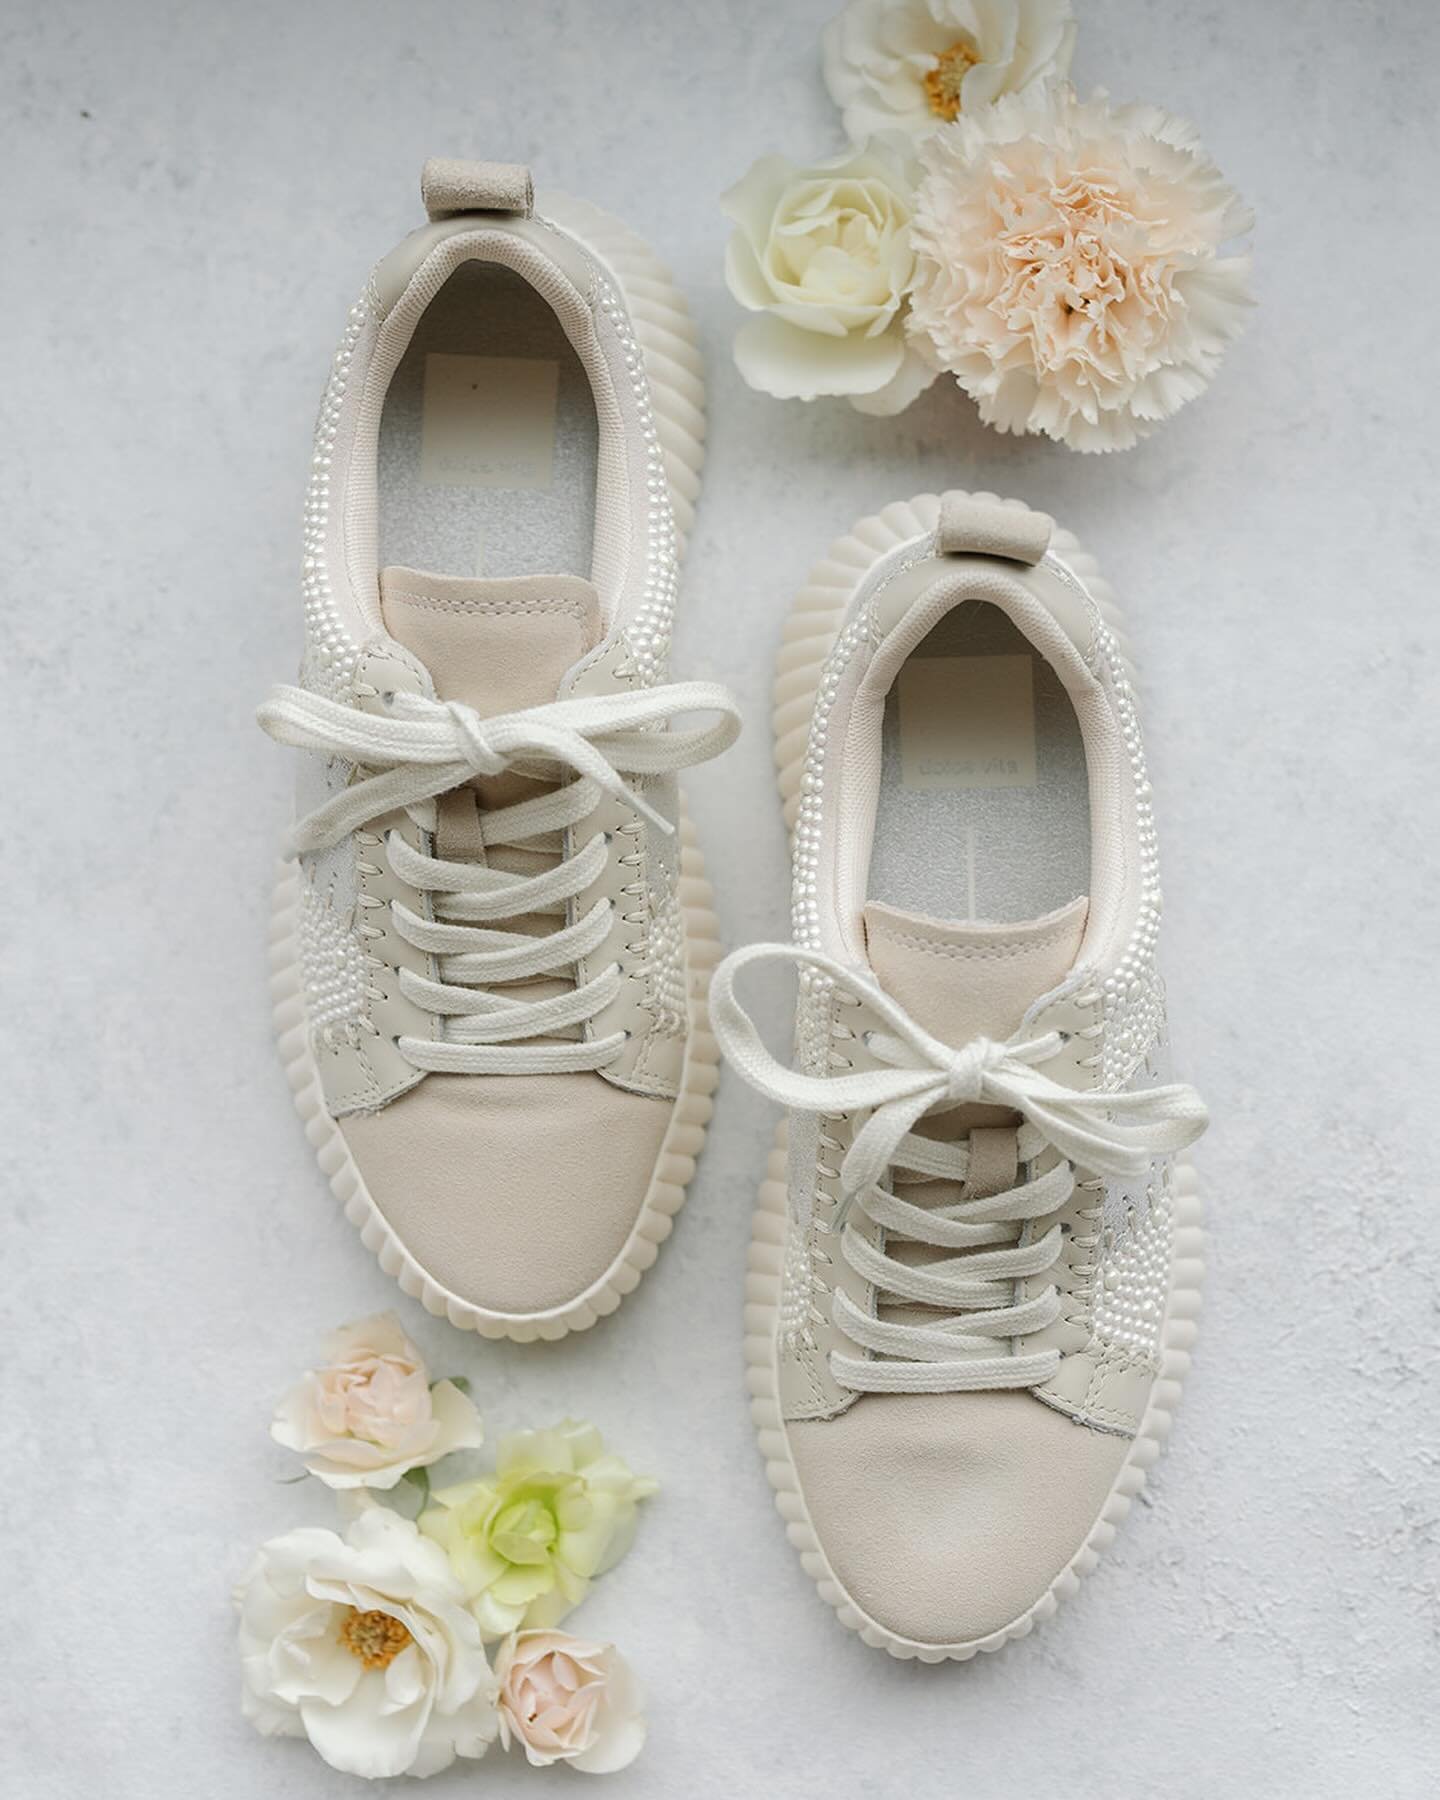 Love a good bridal sneaker! Detail shot sneaks from @linabellweddings at H &amp; S&rsquo;s wedding this month🌸

Planning: @annjohnsonevents 
Venue: @montecitoclub